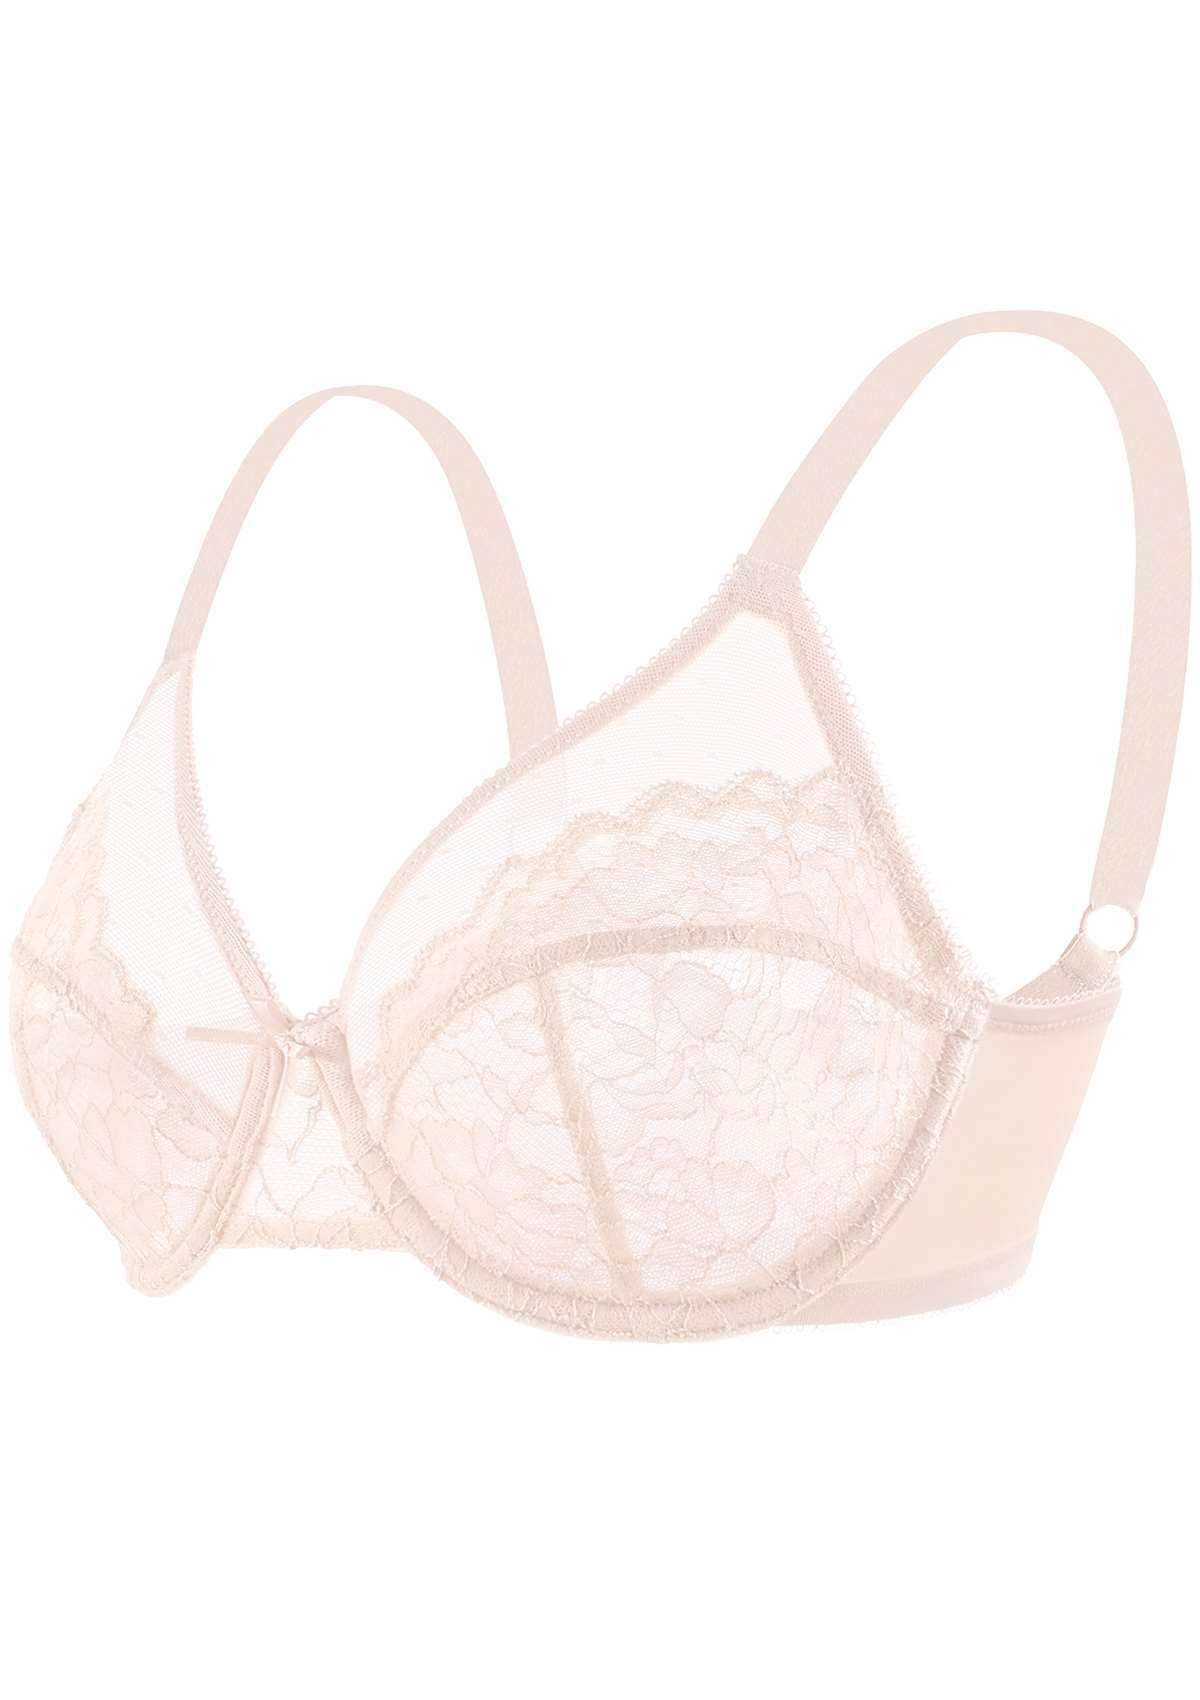 HSIA Enchante Lacy Bra: Comfy Sheer Lace Bra With Lift - Dusty Peach / 38 / I